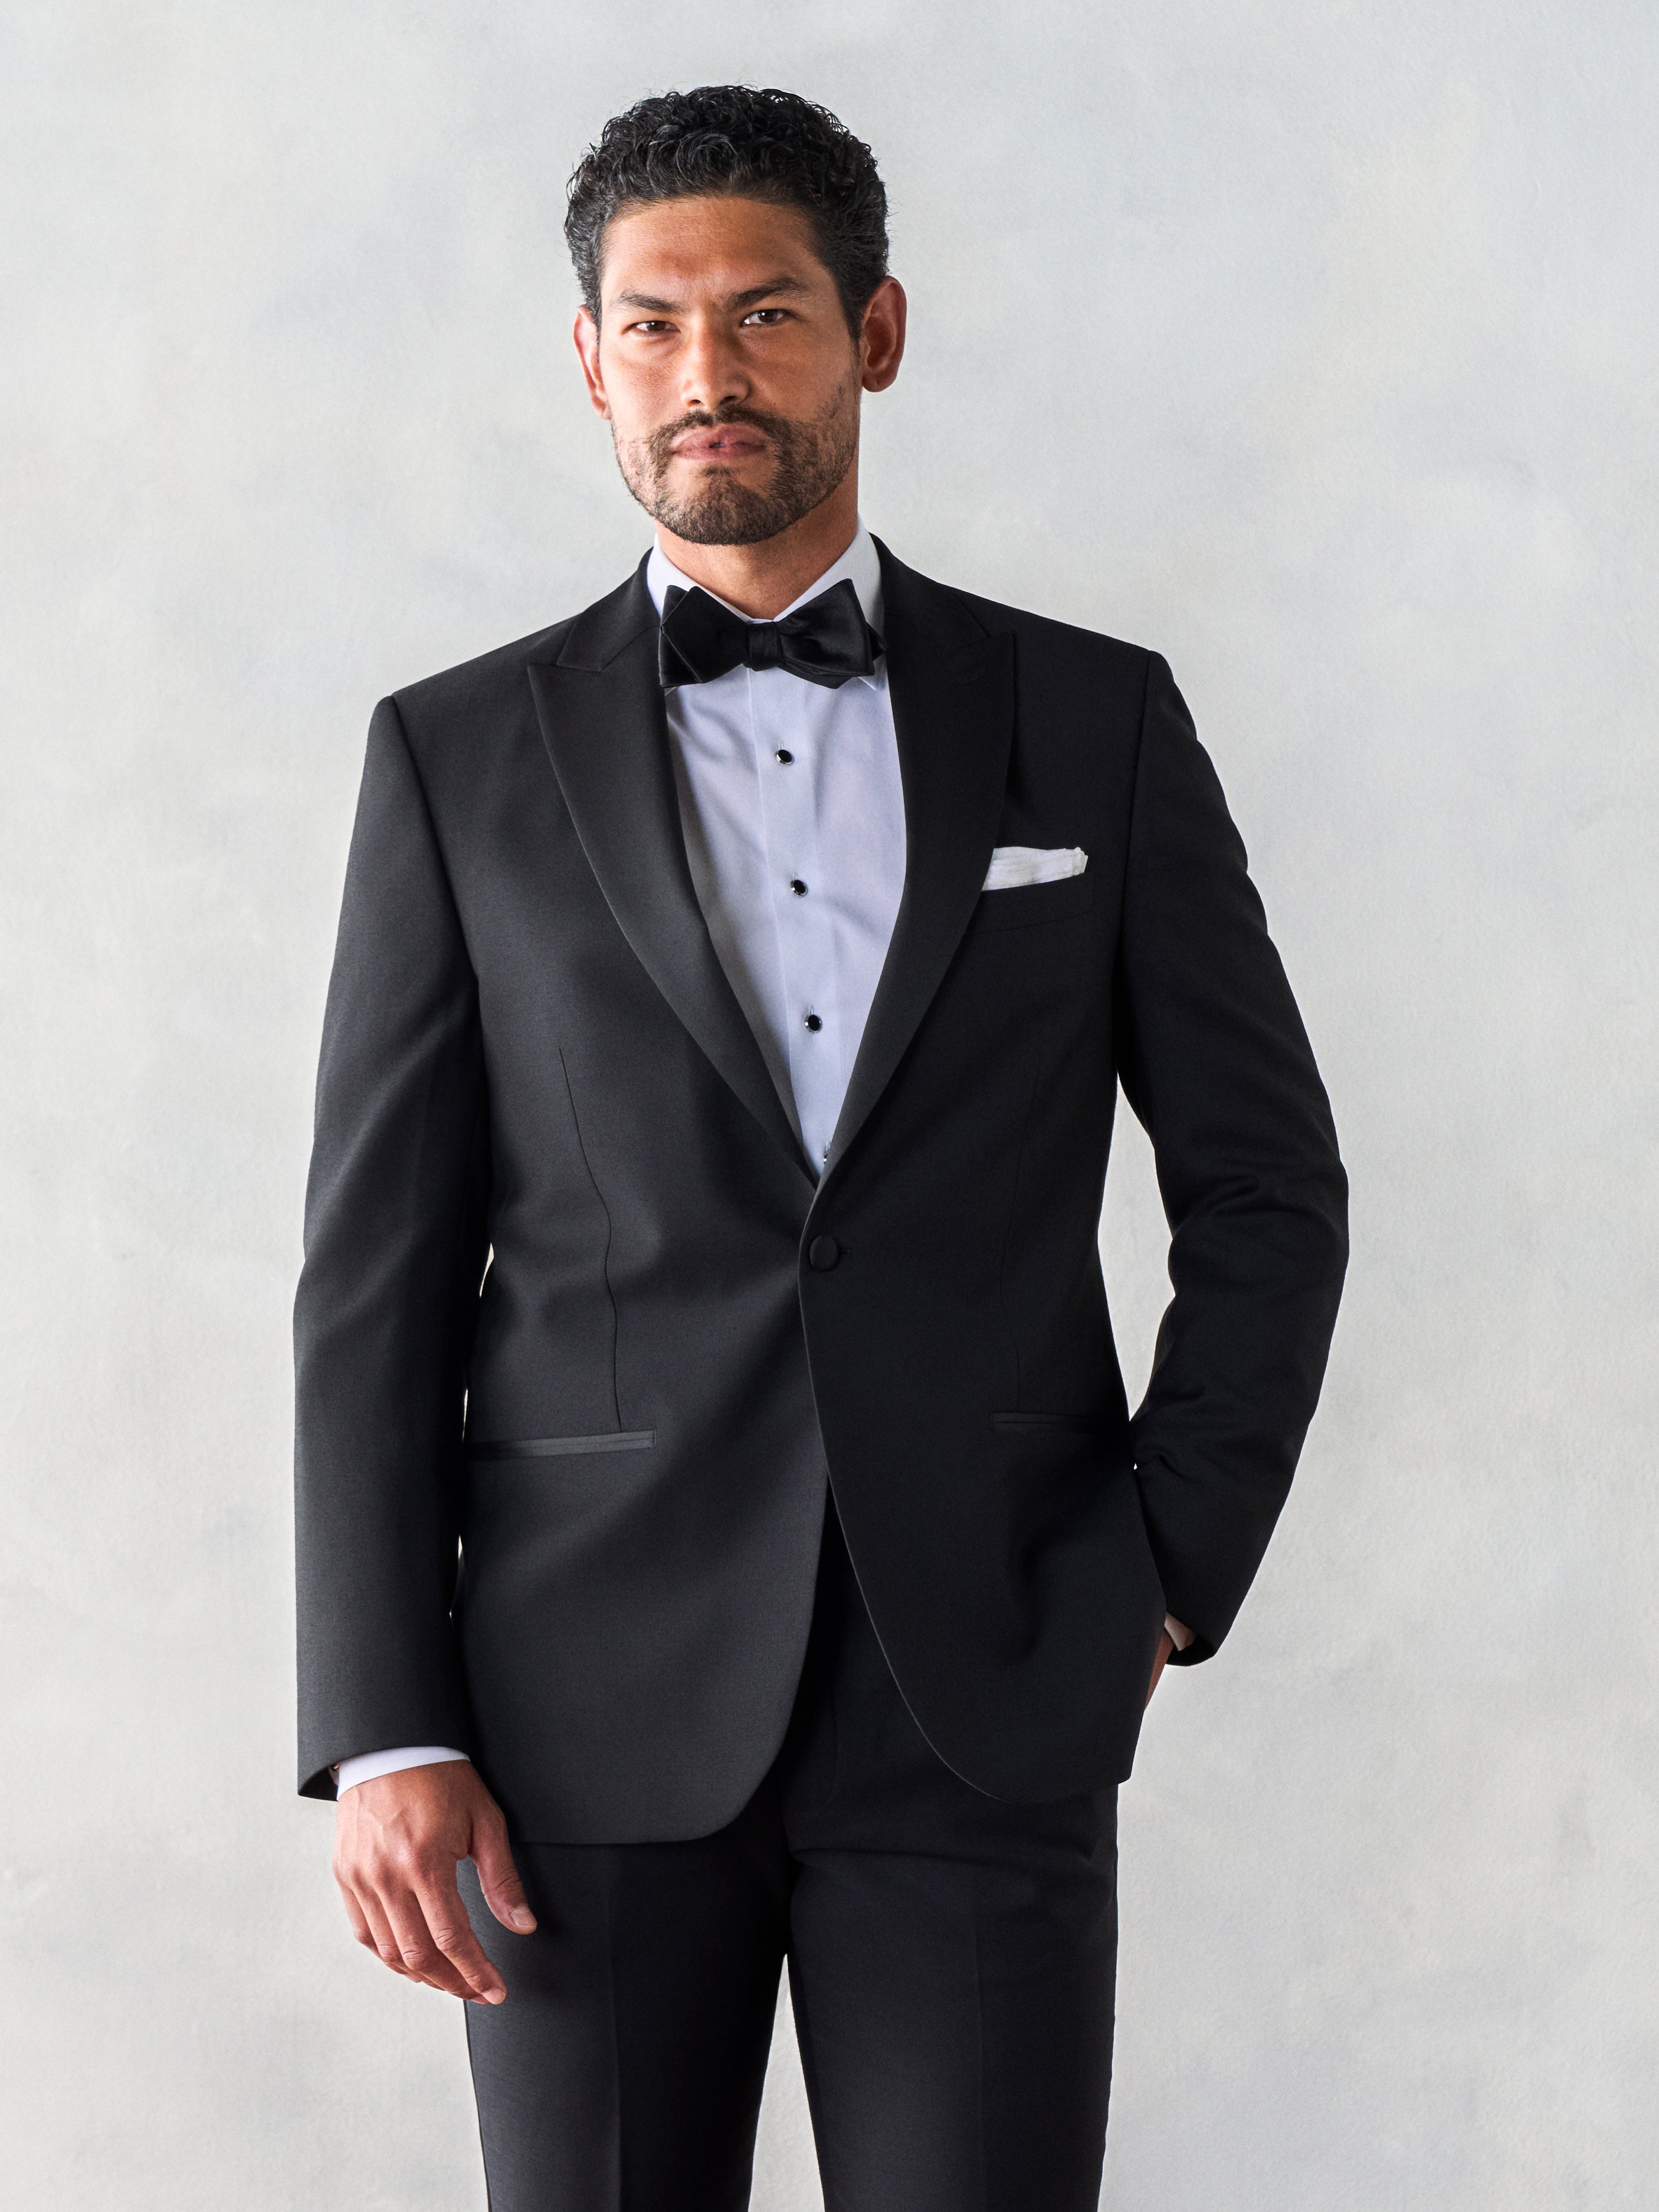 A Complete Guide to Black Suit & Shirt Combinations - The Trend Spotter | Black  suit black shirt, Black suit pink shirt, Black suits